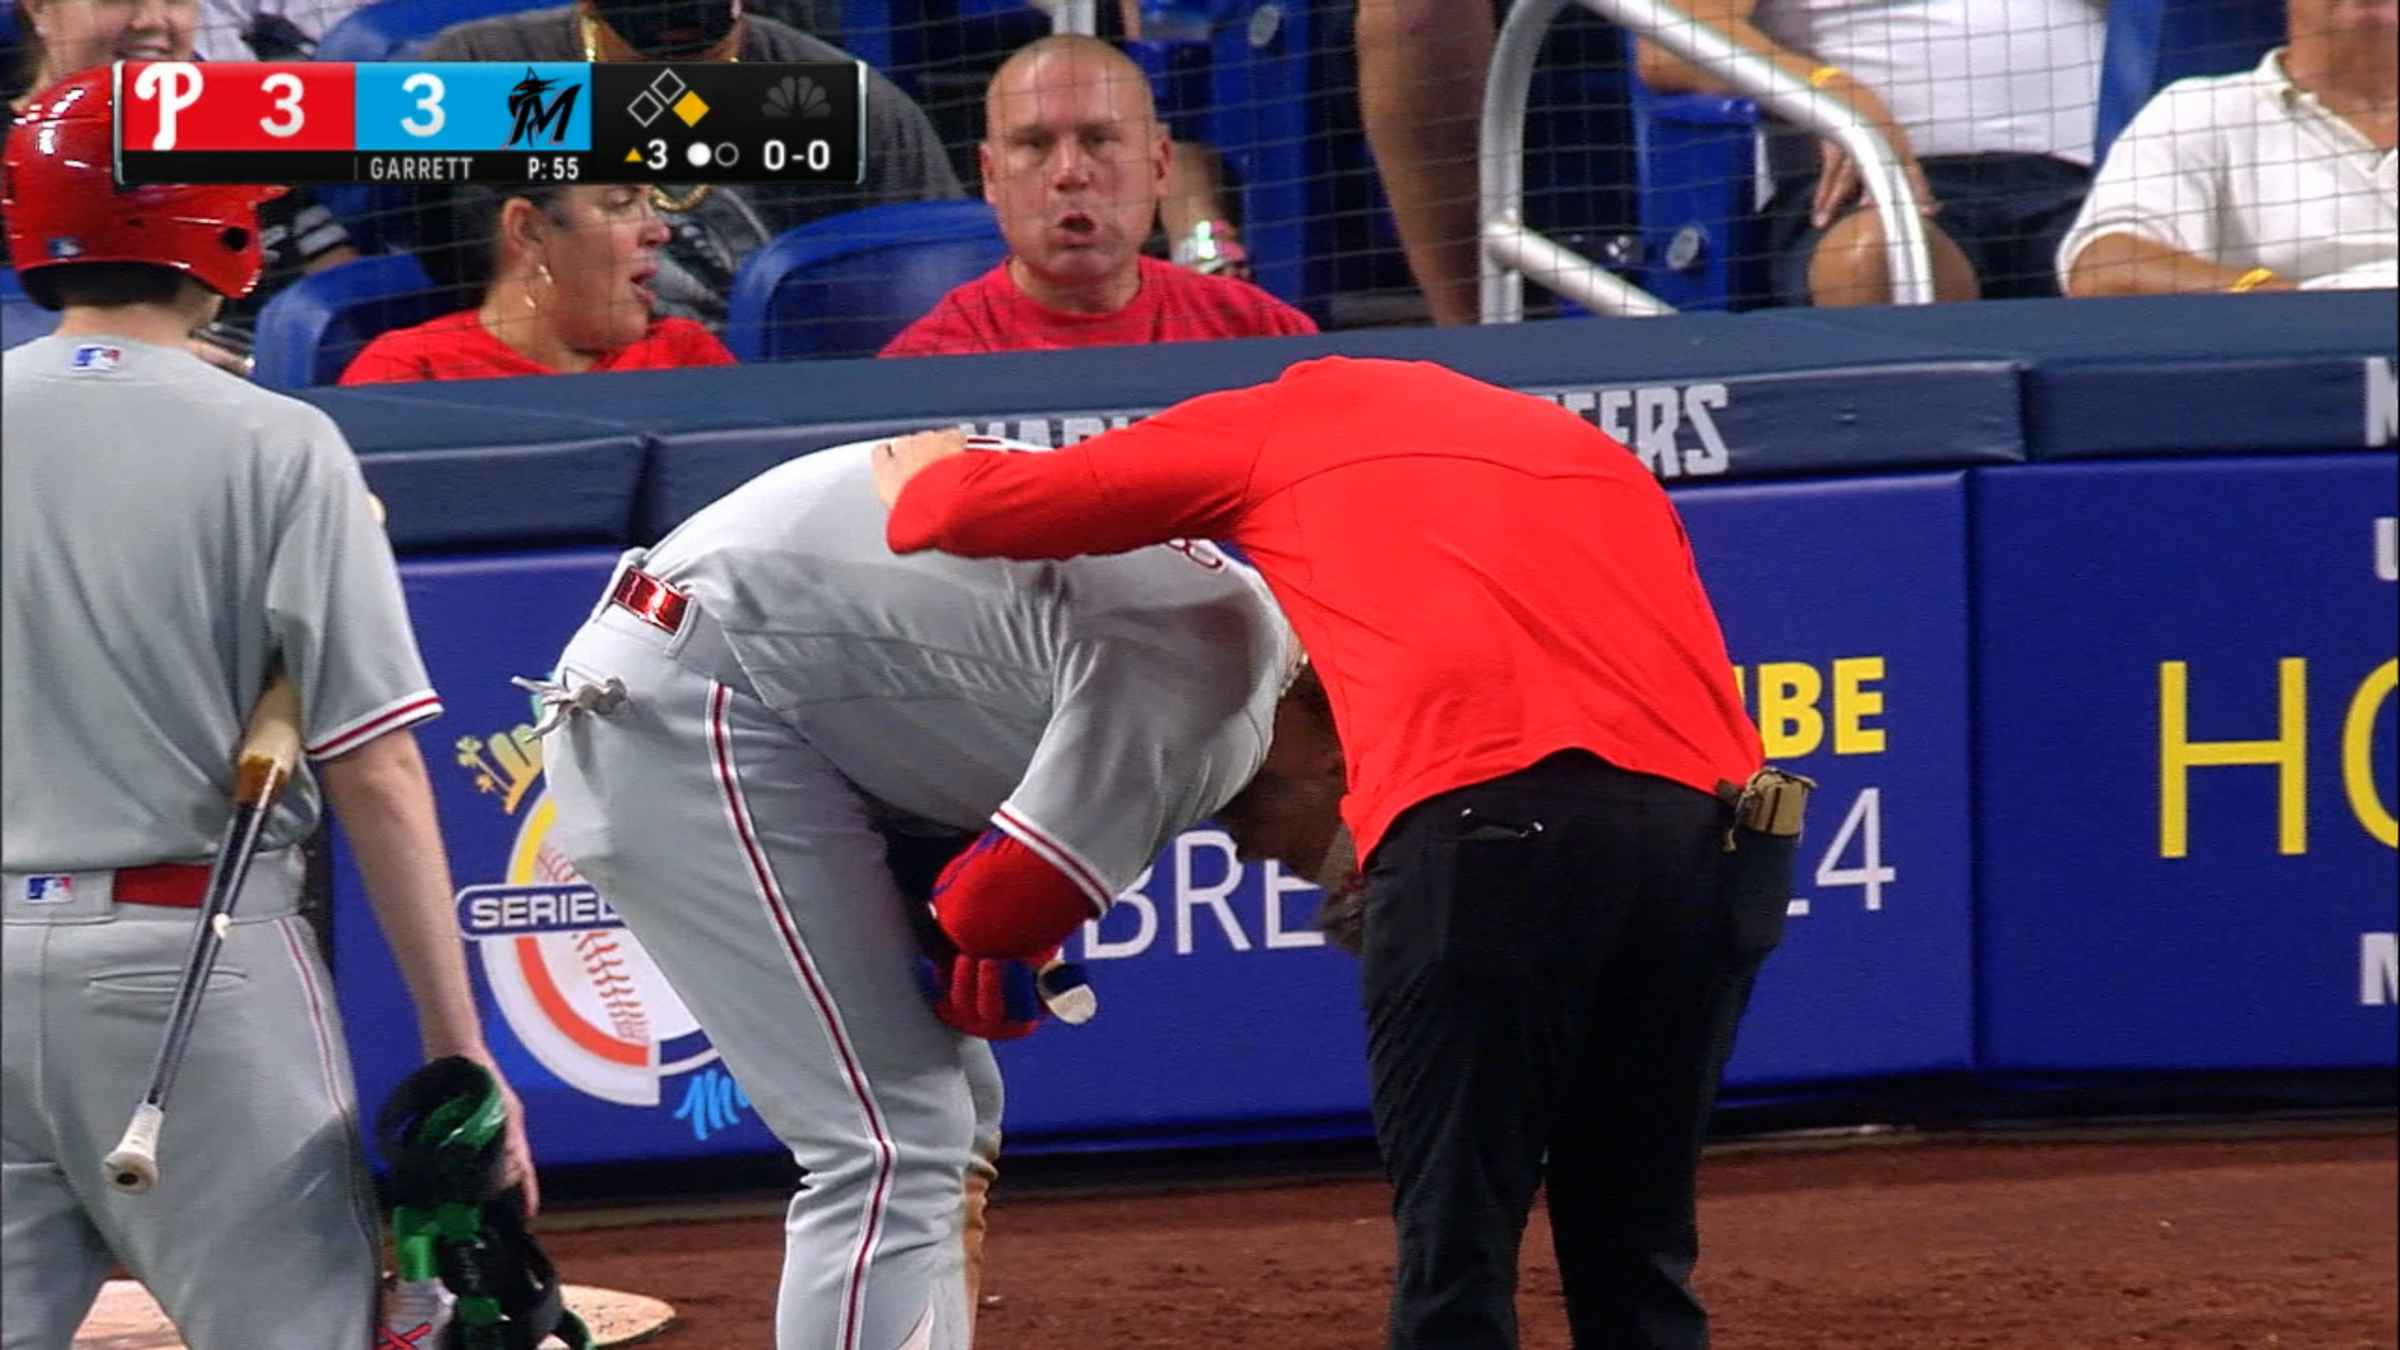 Phillies' Bryce Harper hit by pitch, leaves game